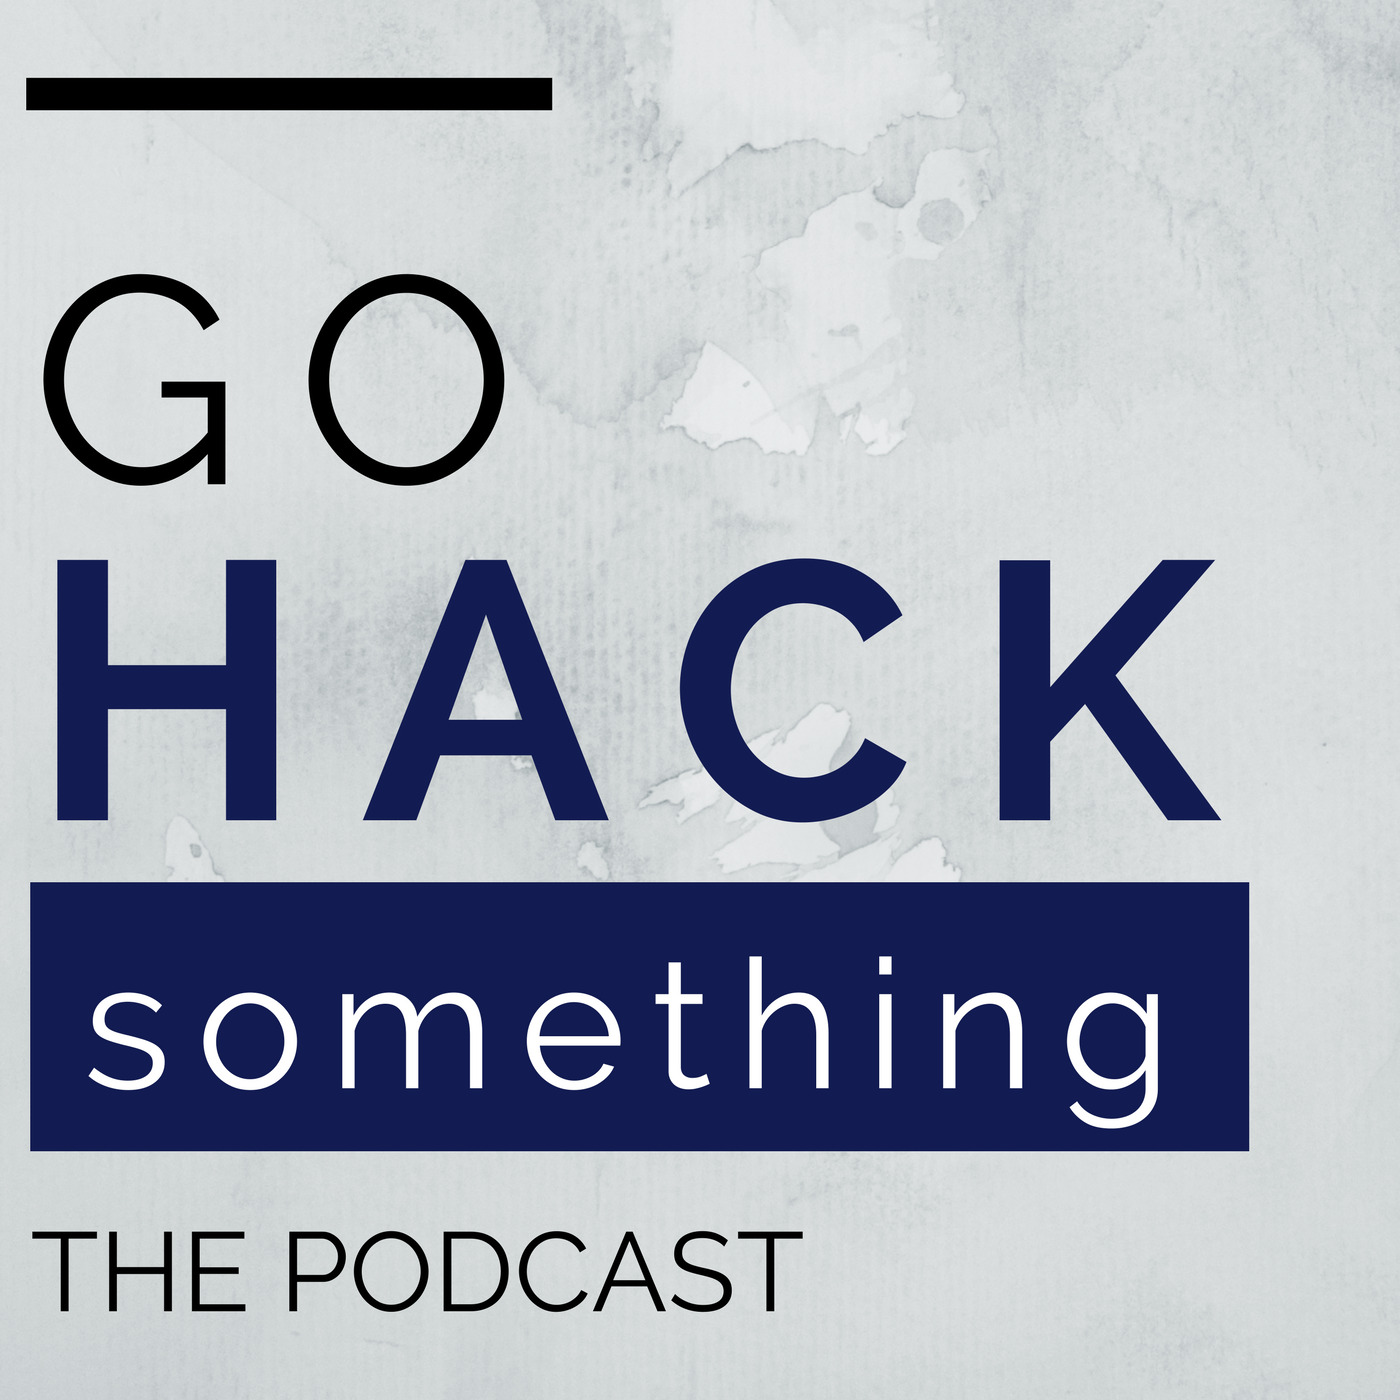 Go Hack Something - Where Education and Technology Meet